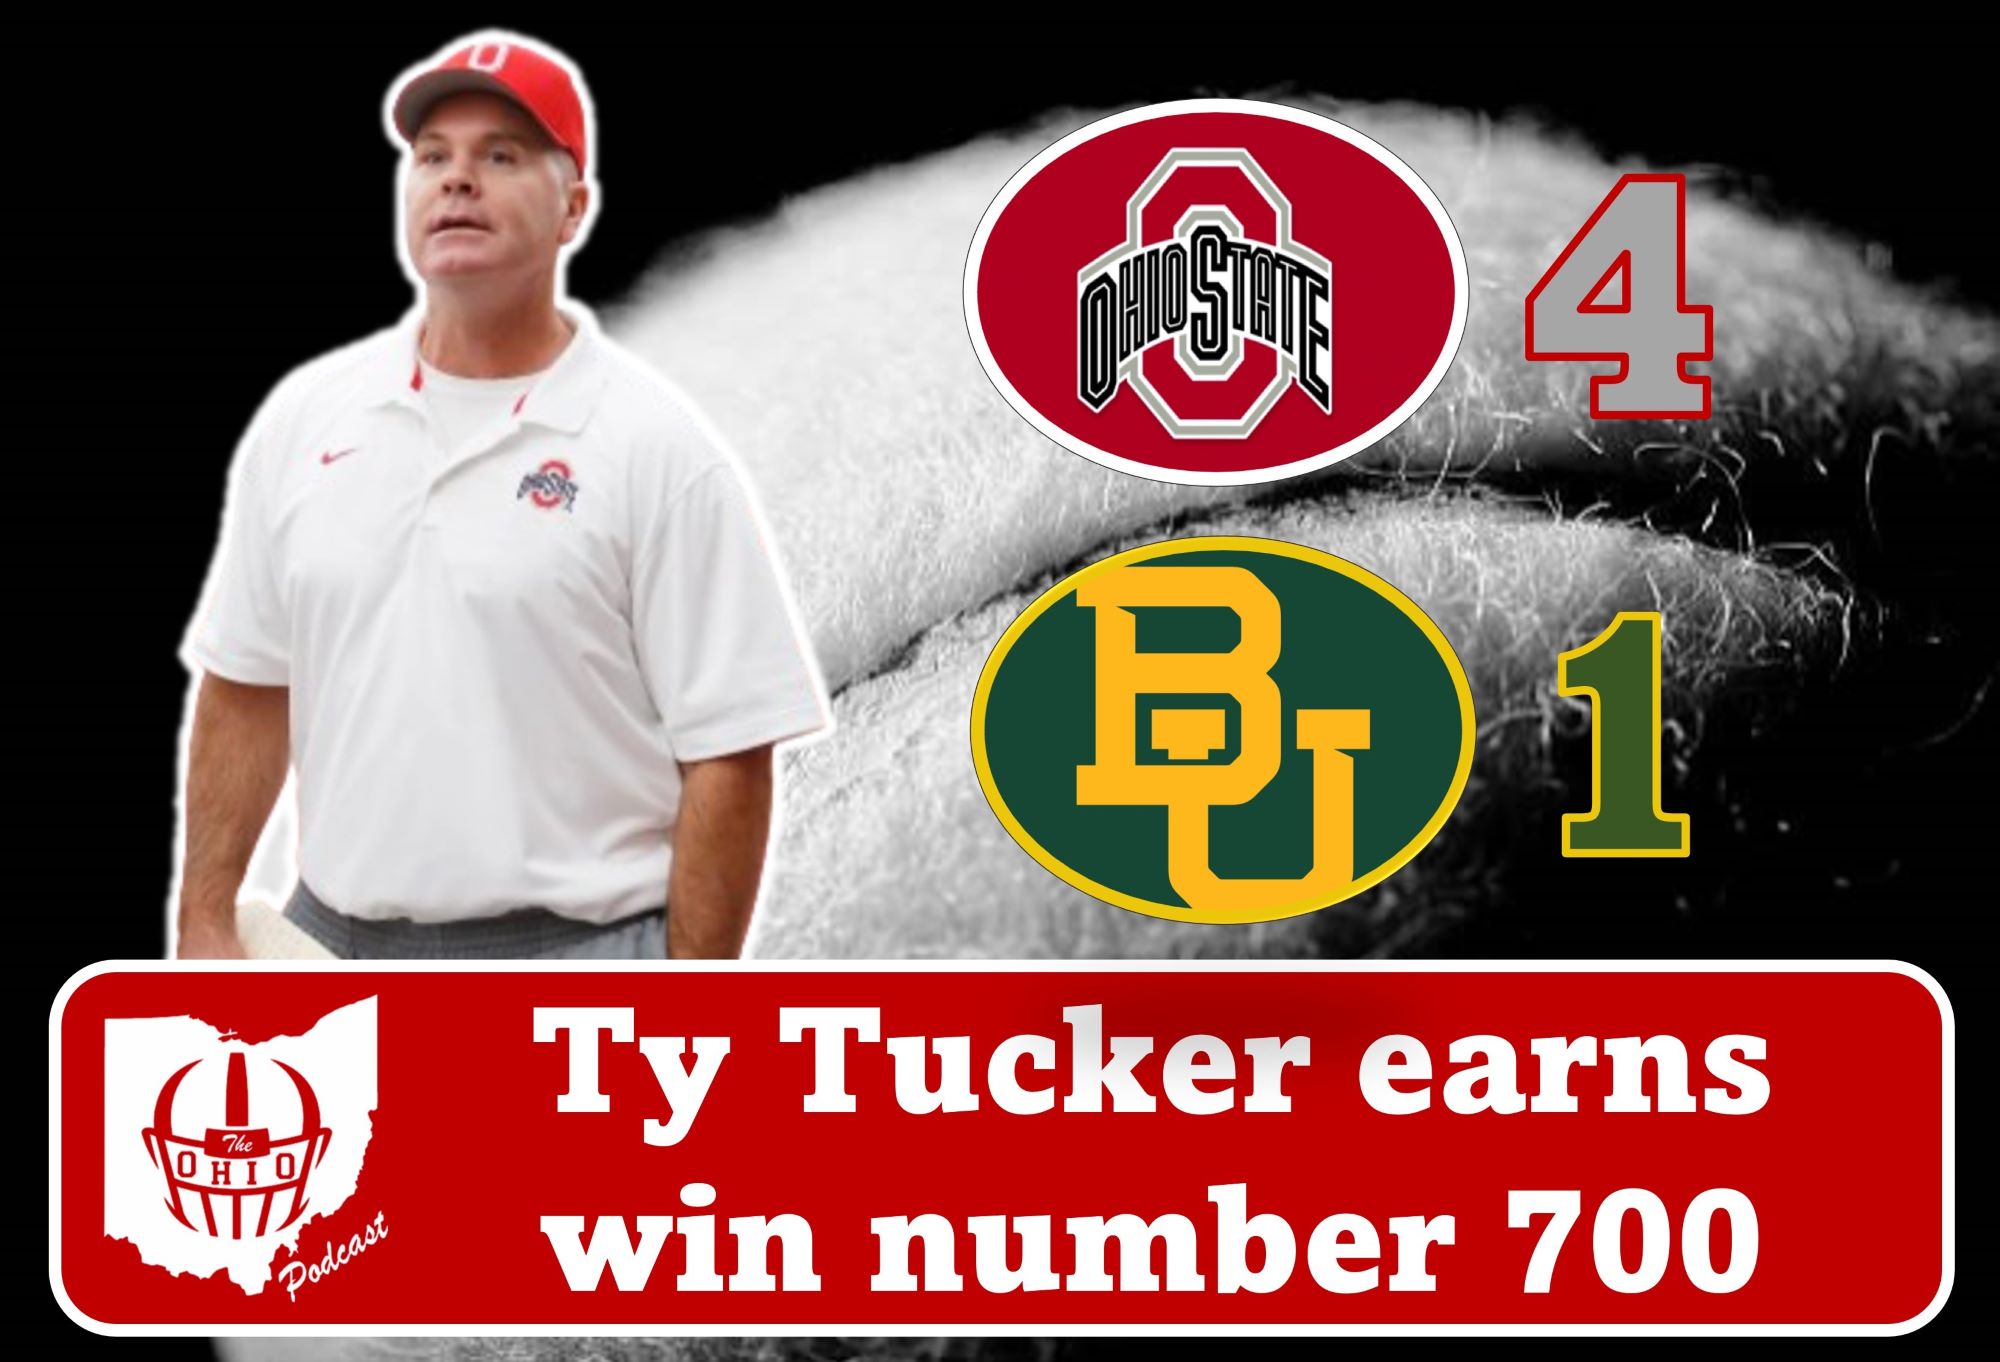 Ohio State Men’s Tennis defeats Baylor in Historic 700th win for Ty Tucker